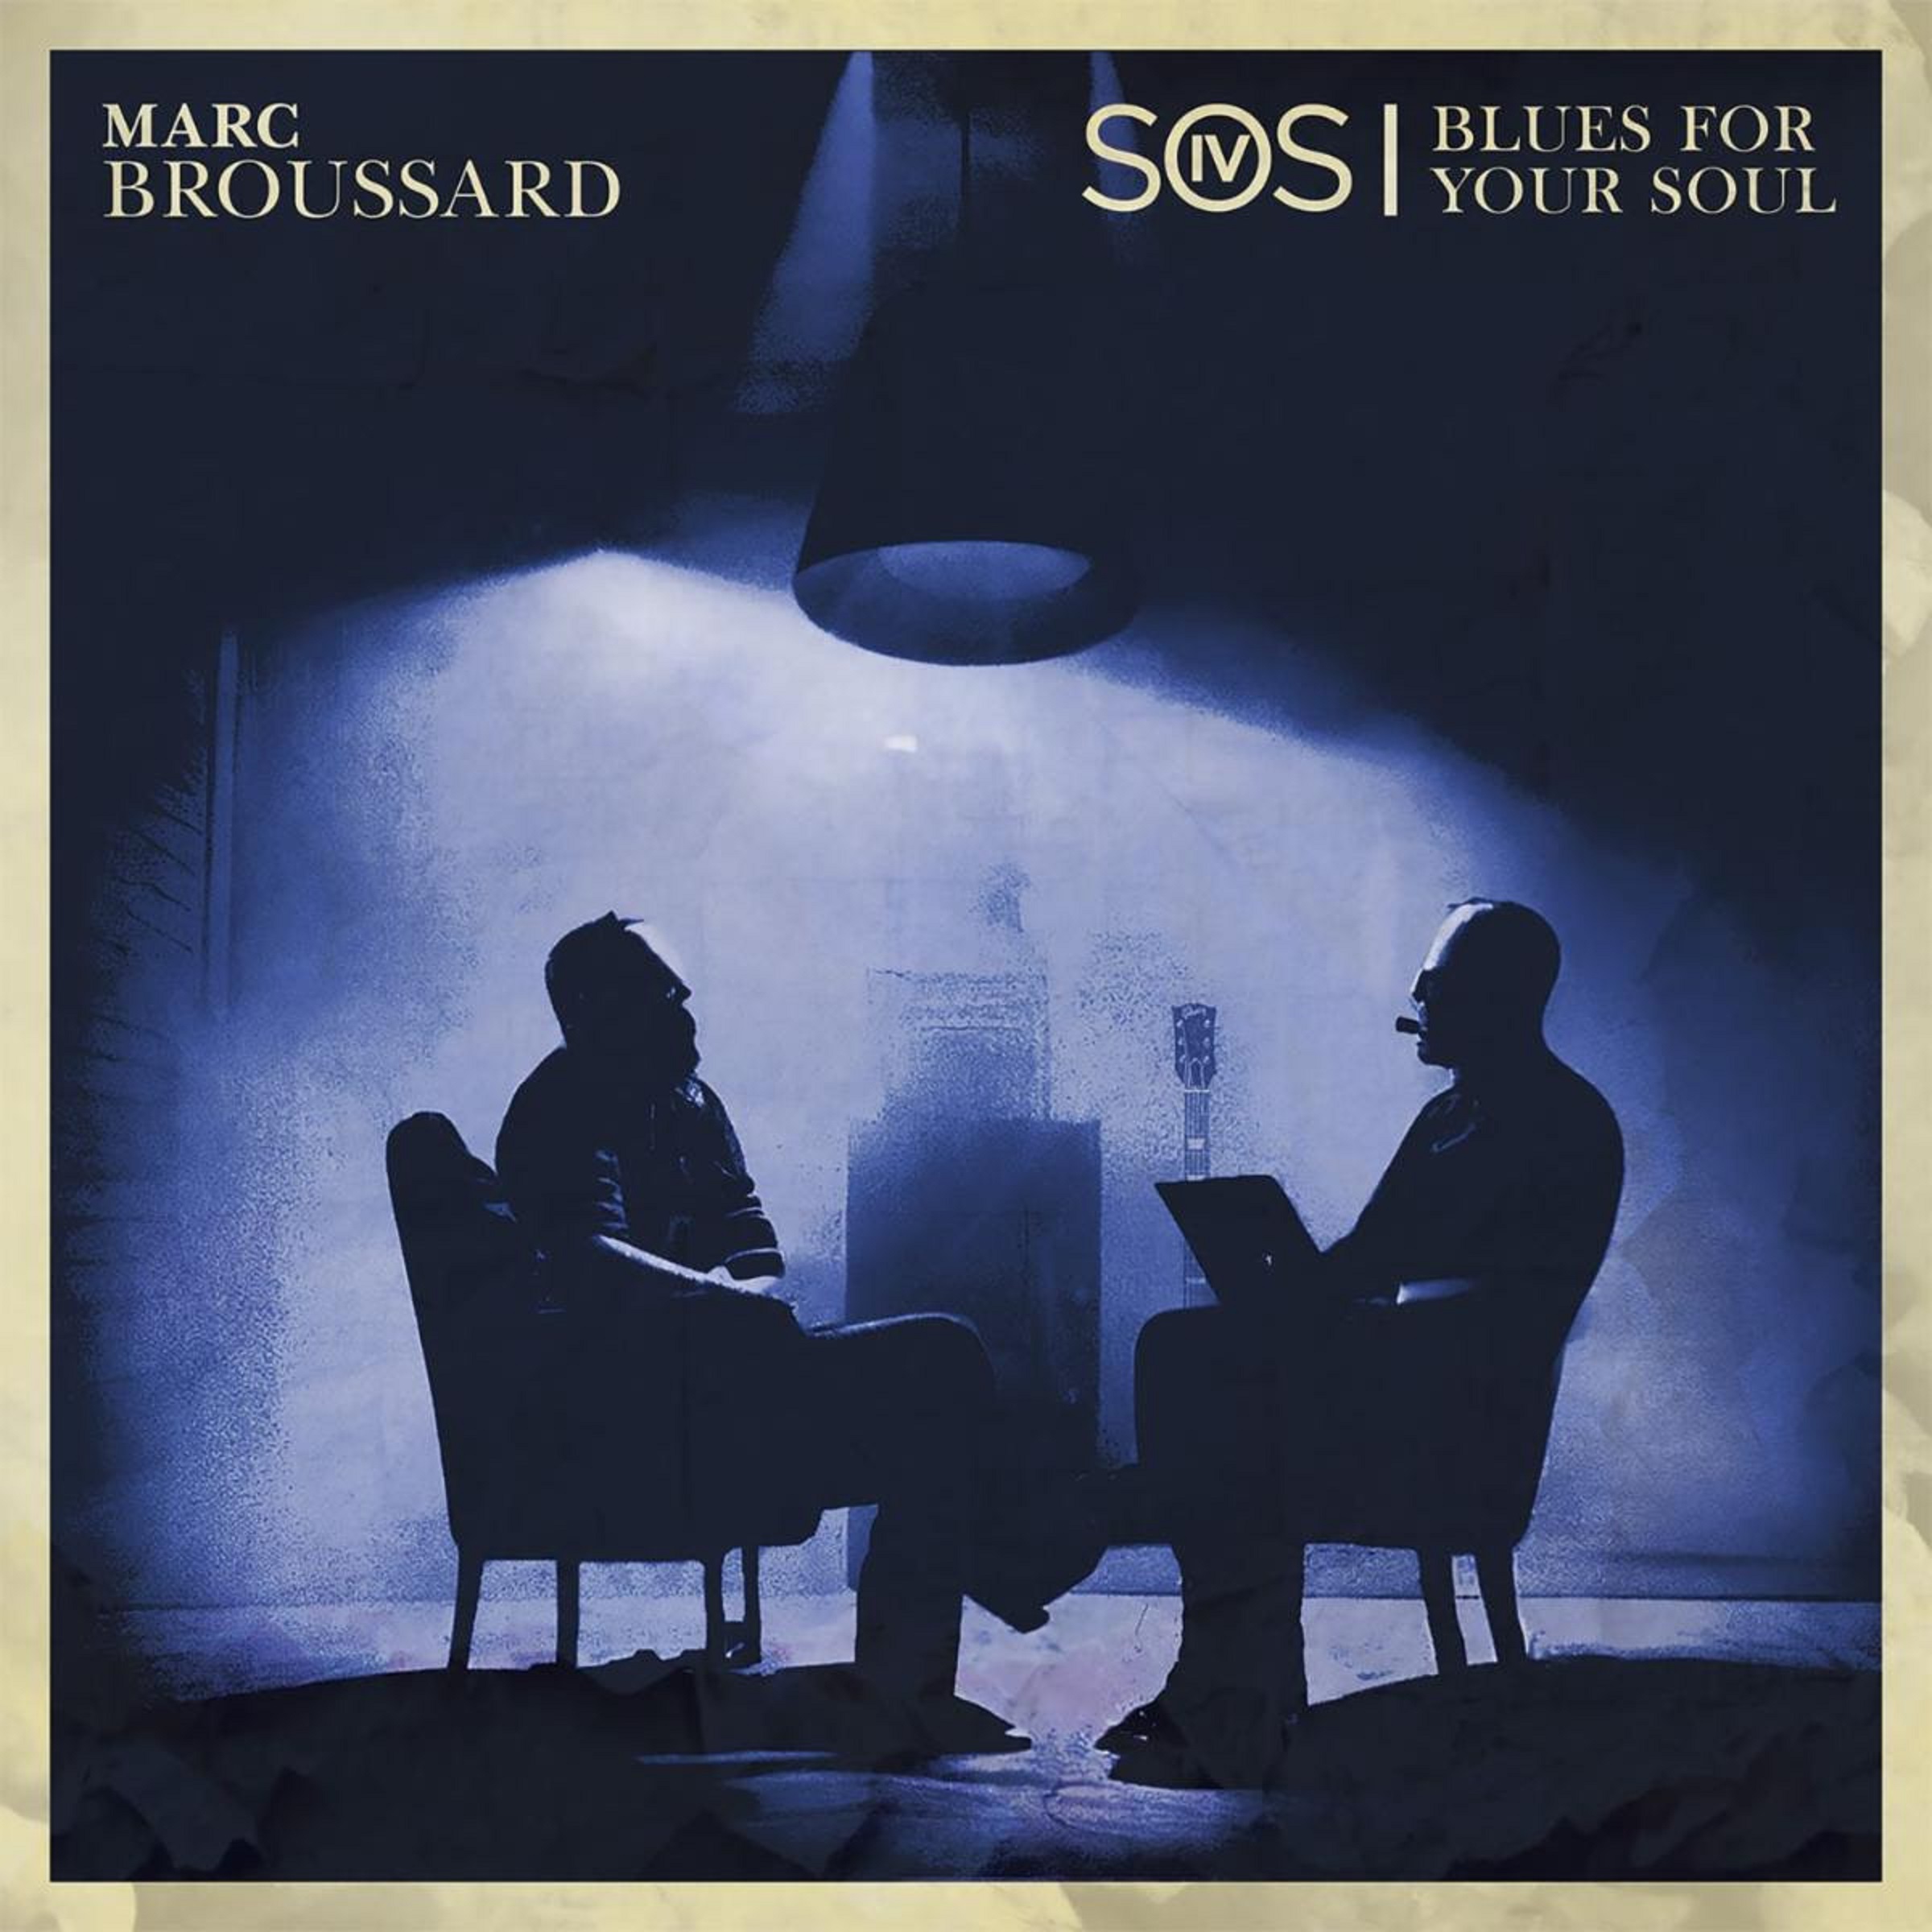 Marc Broussard debuts at #1 on Billboard Blues Albums Chart with 'S.O.S 4: Blues For Your Soul'